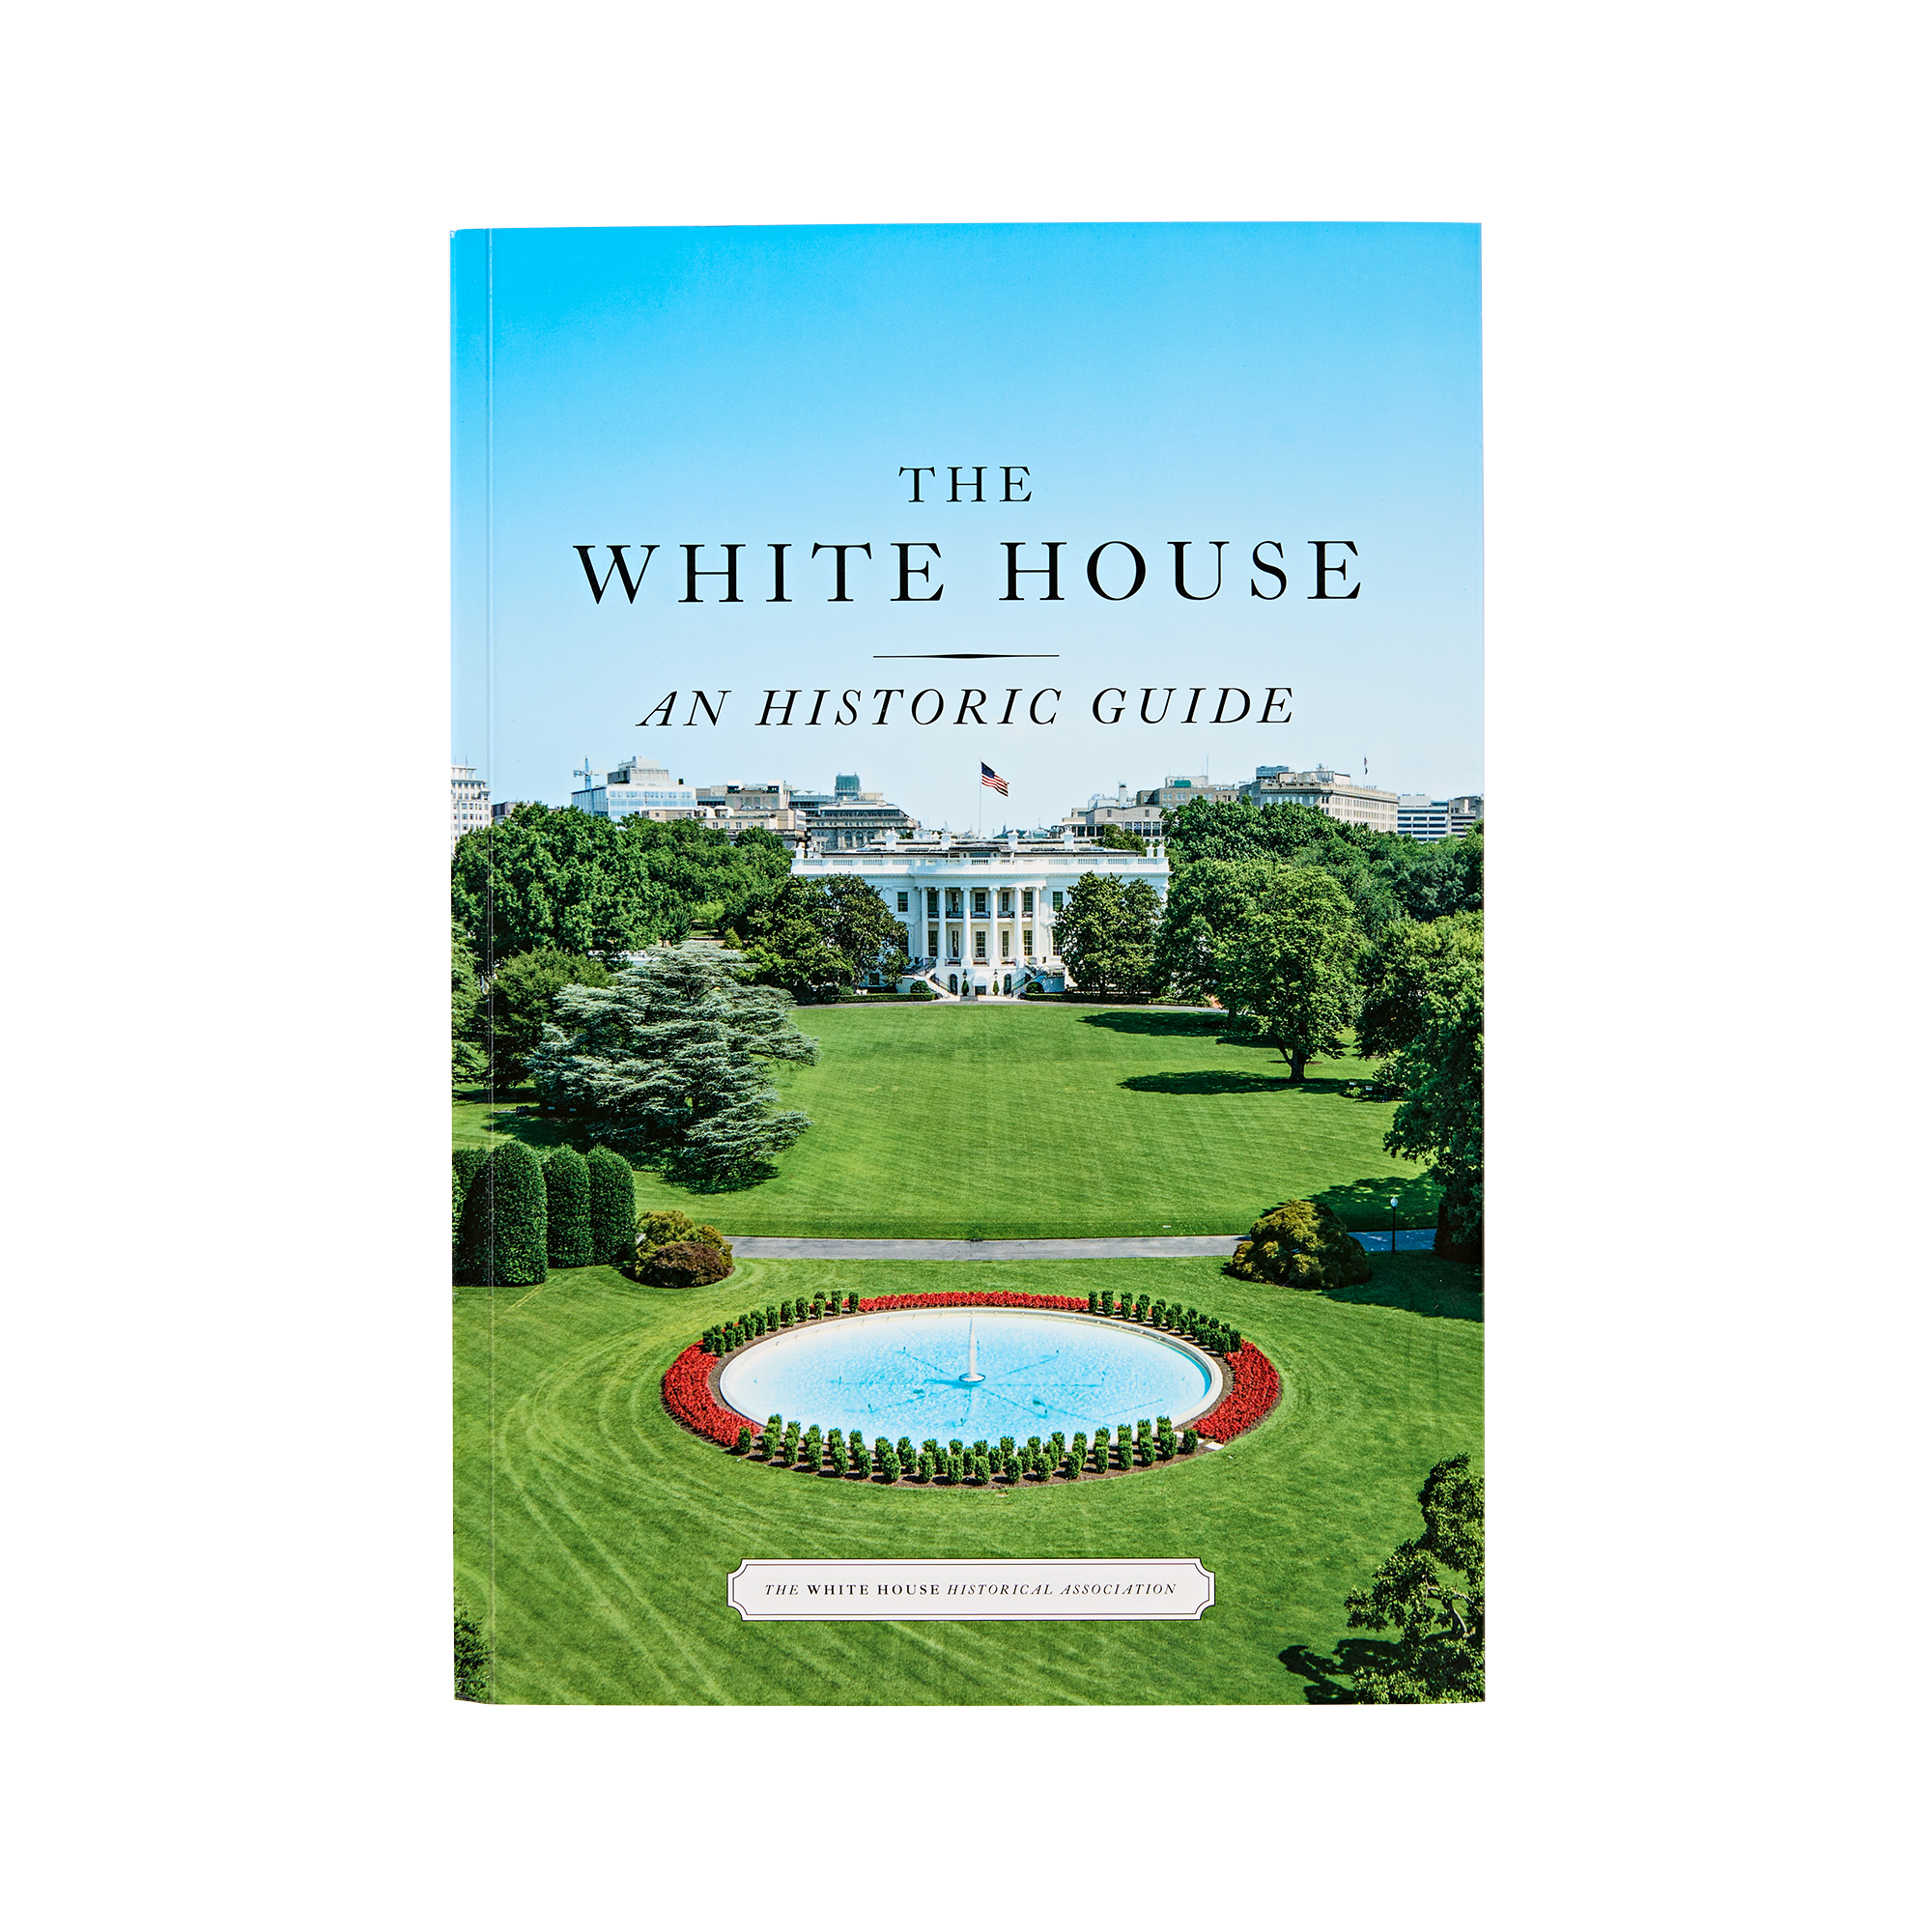 The White House Information Guide